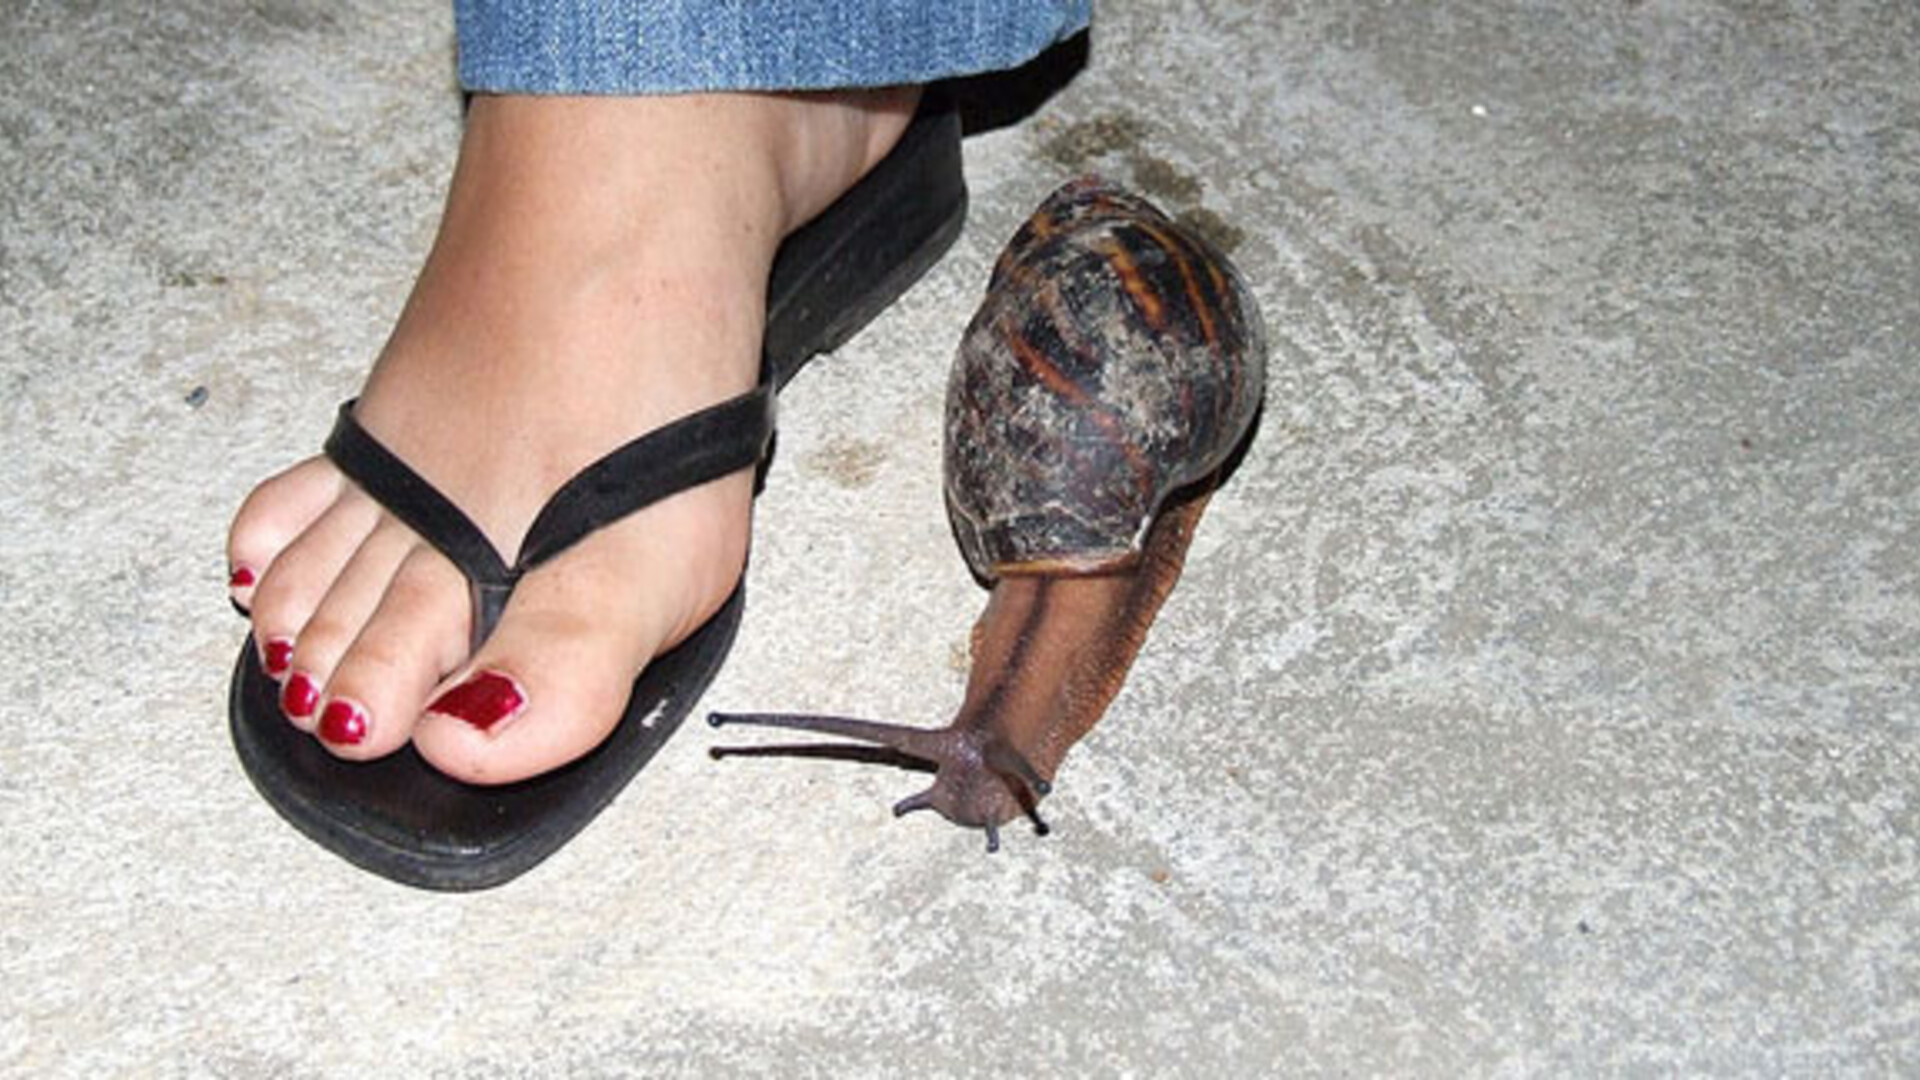 FL Works to Eradicate Giant African Land Snail...Again